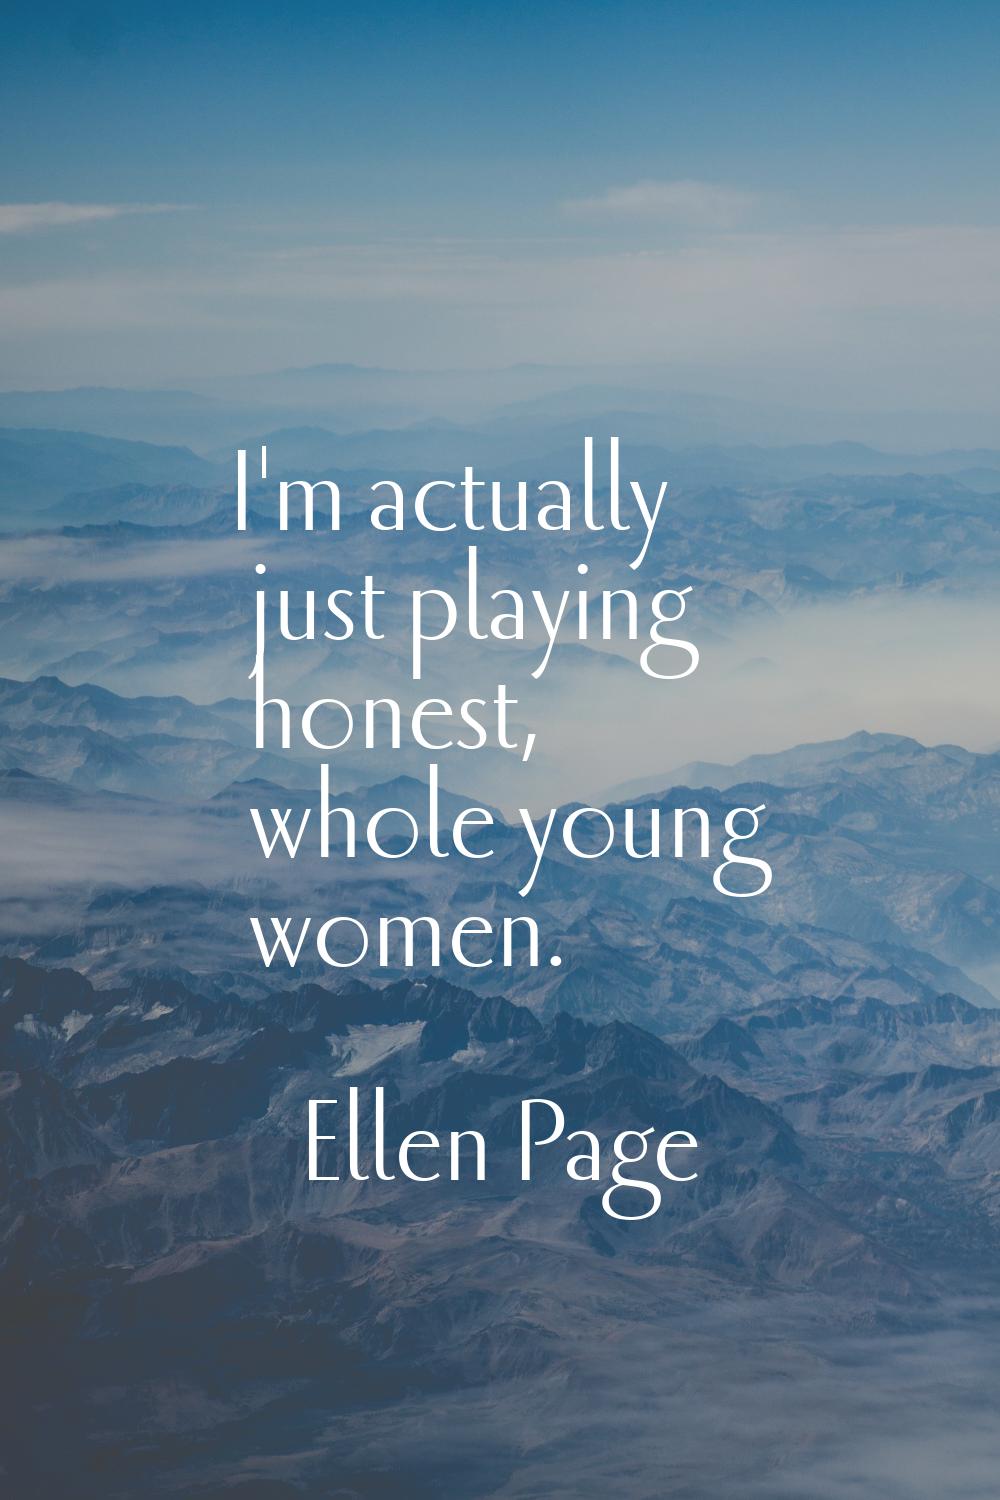 I'm actually just playing honest, whole young women.